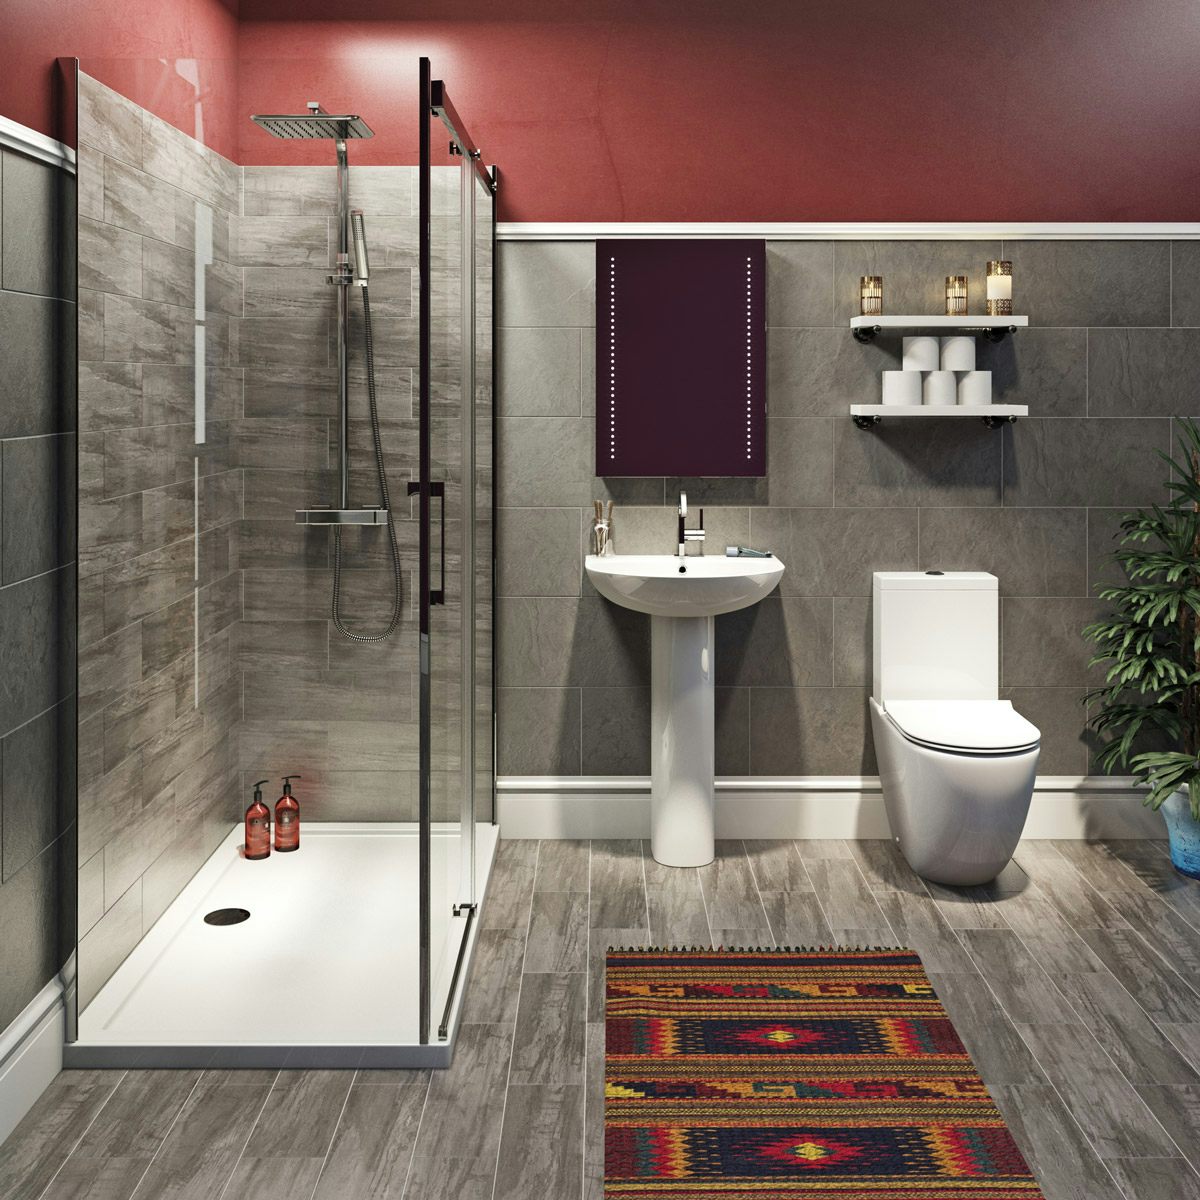 Mode Harrison complete bathroom suite with enclosure, tray, shower and taps 1700 x 900